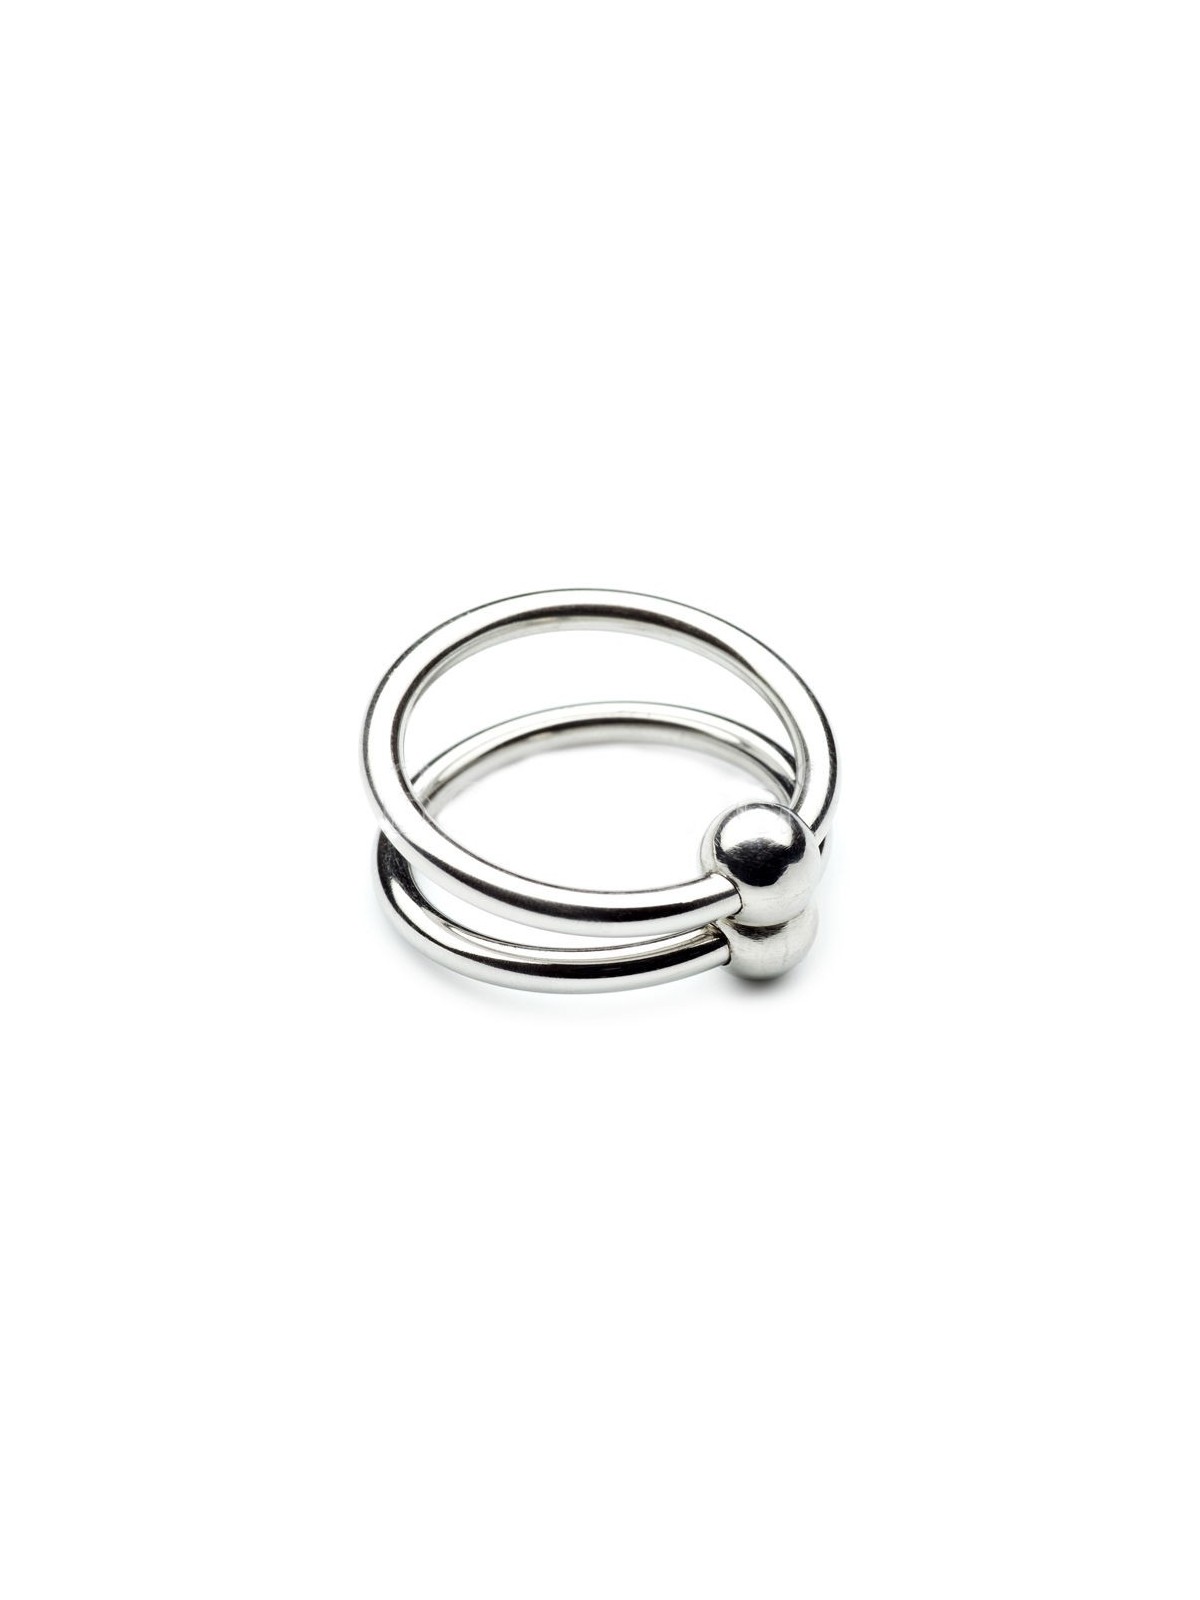 Metalhard Double Glans Ring - Comprar Anillo metal pene Metal Hard - Anillos de metal pene (1)